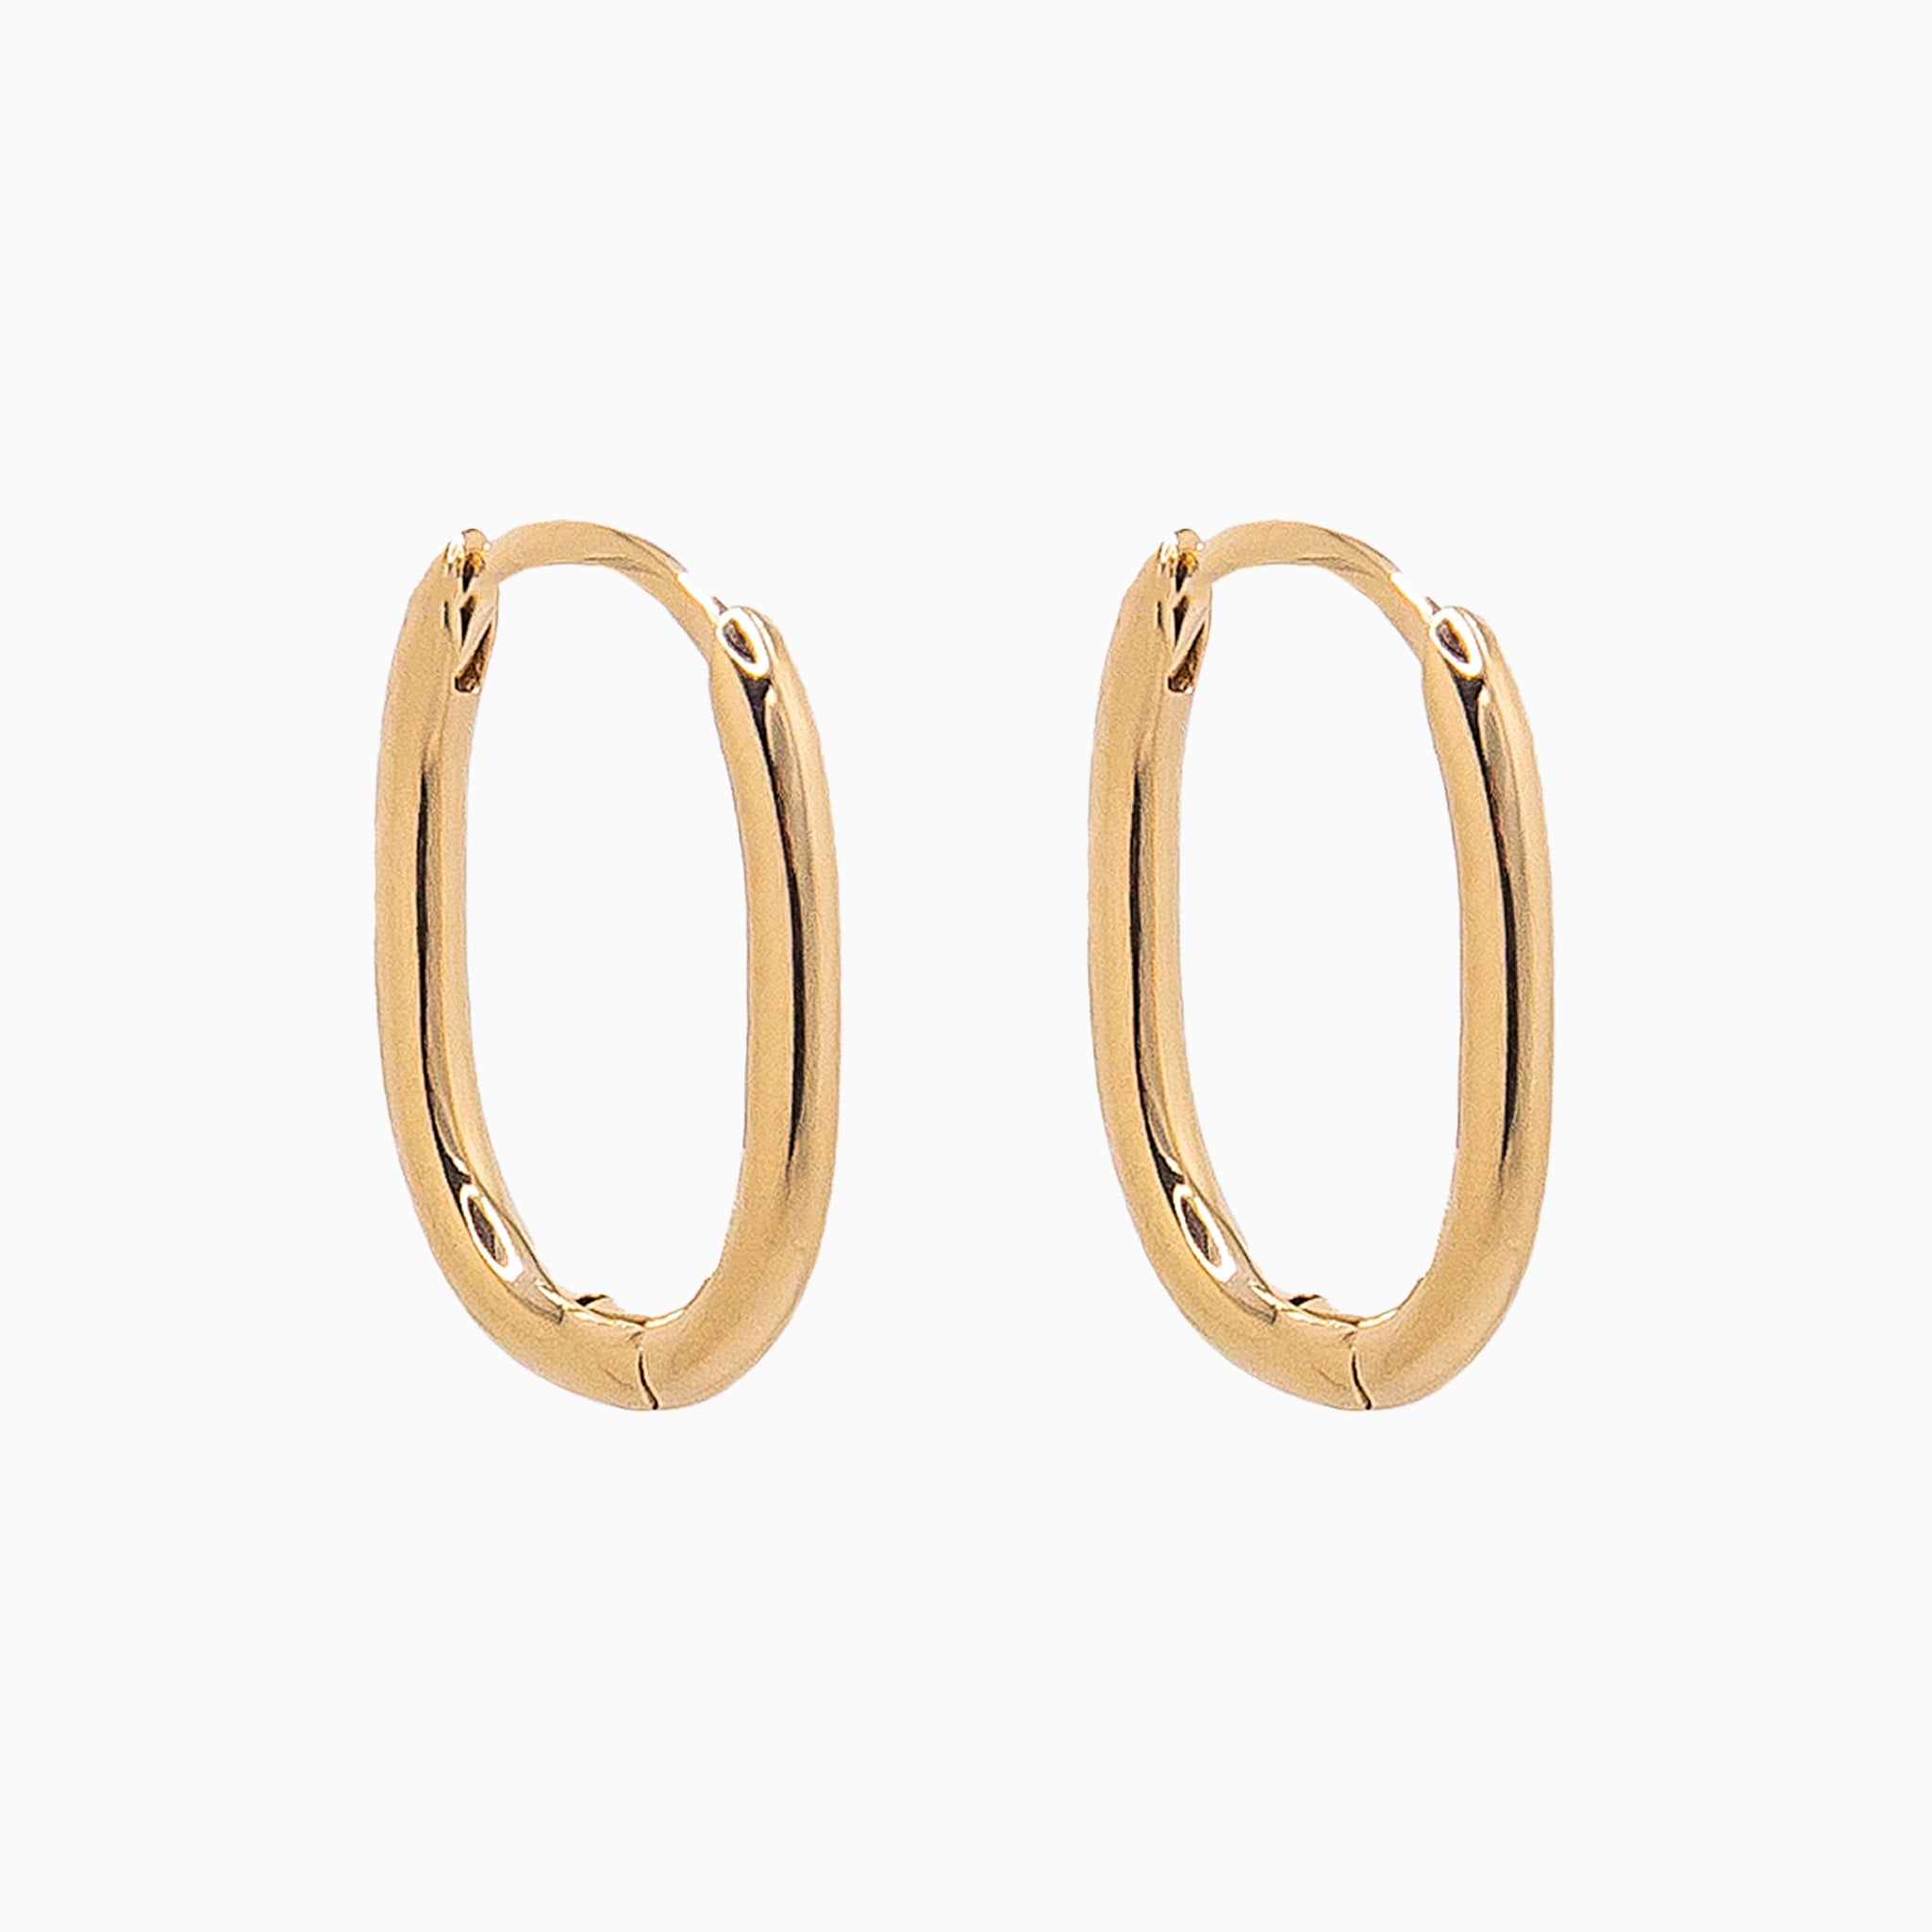 14k Yellow Gold 15mm x 10mm Hinged Everyday Oval Hoop Earrings